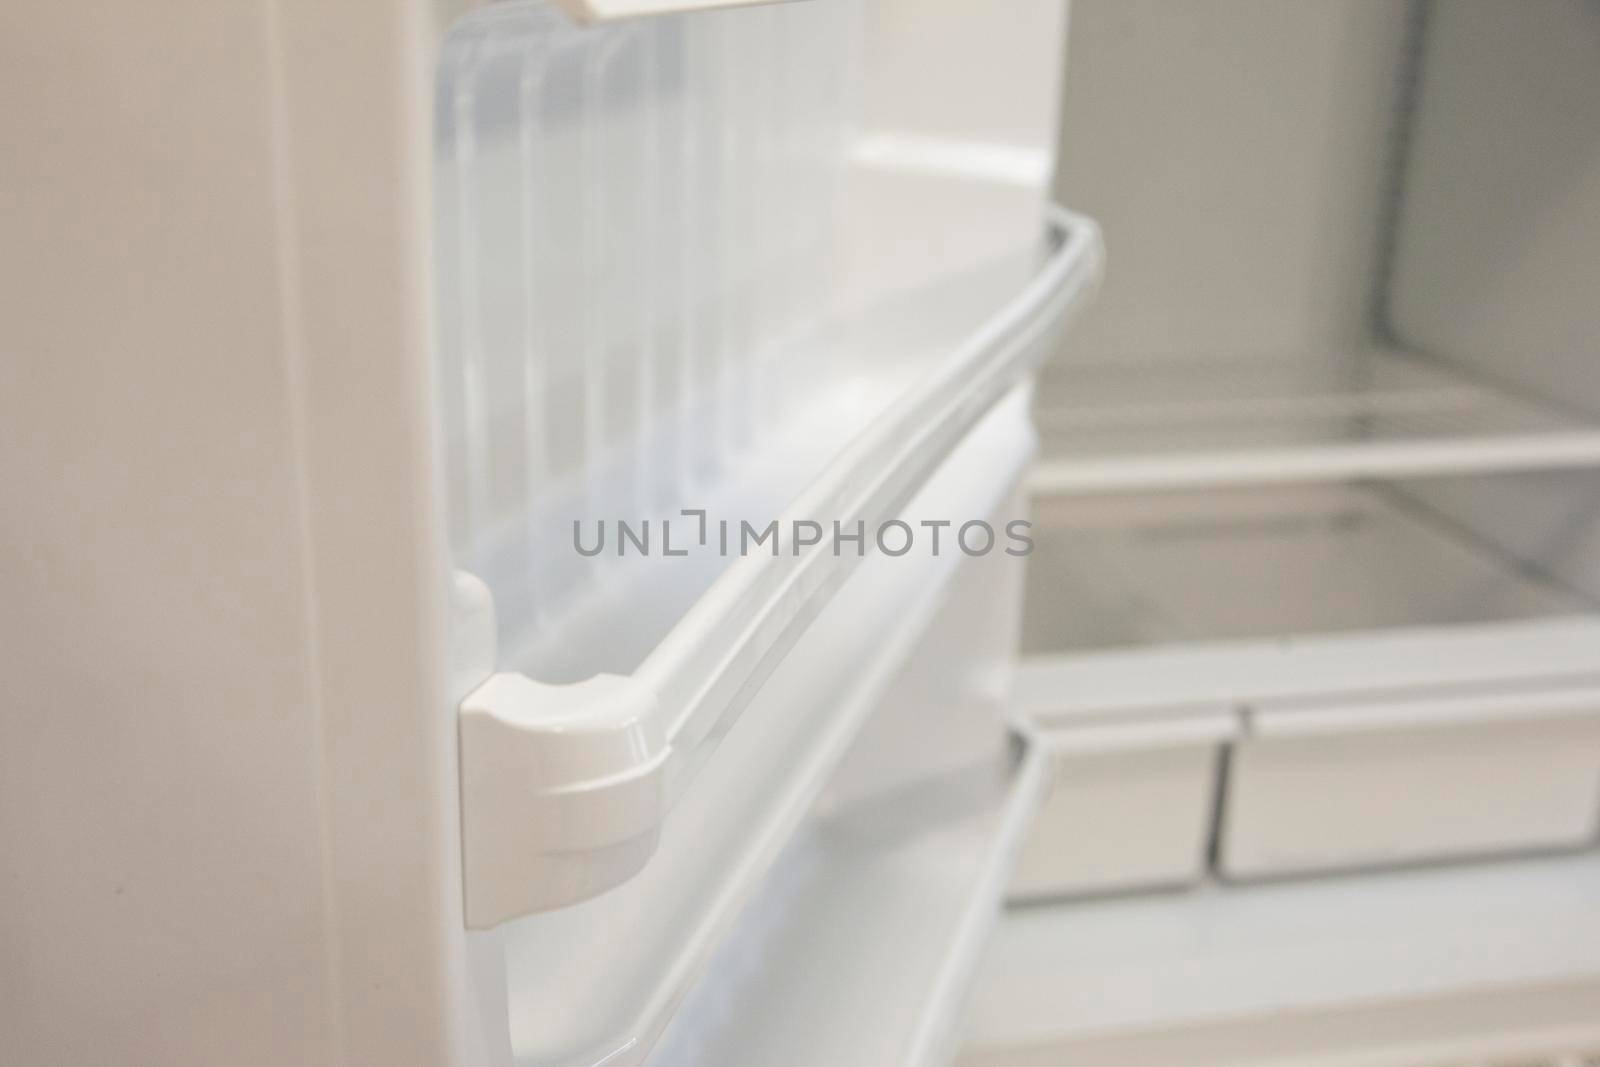 A shelf of a kitchen fridge that is bare with no food